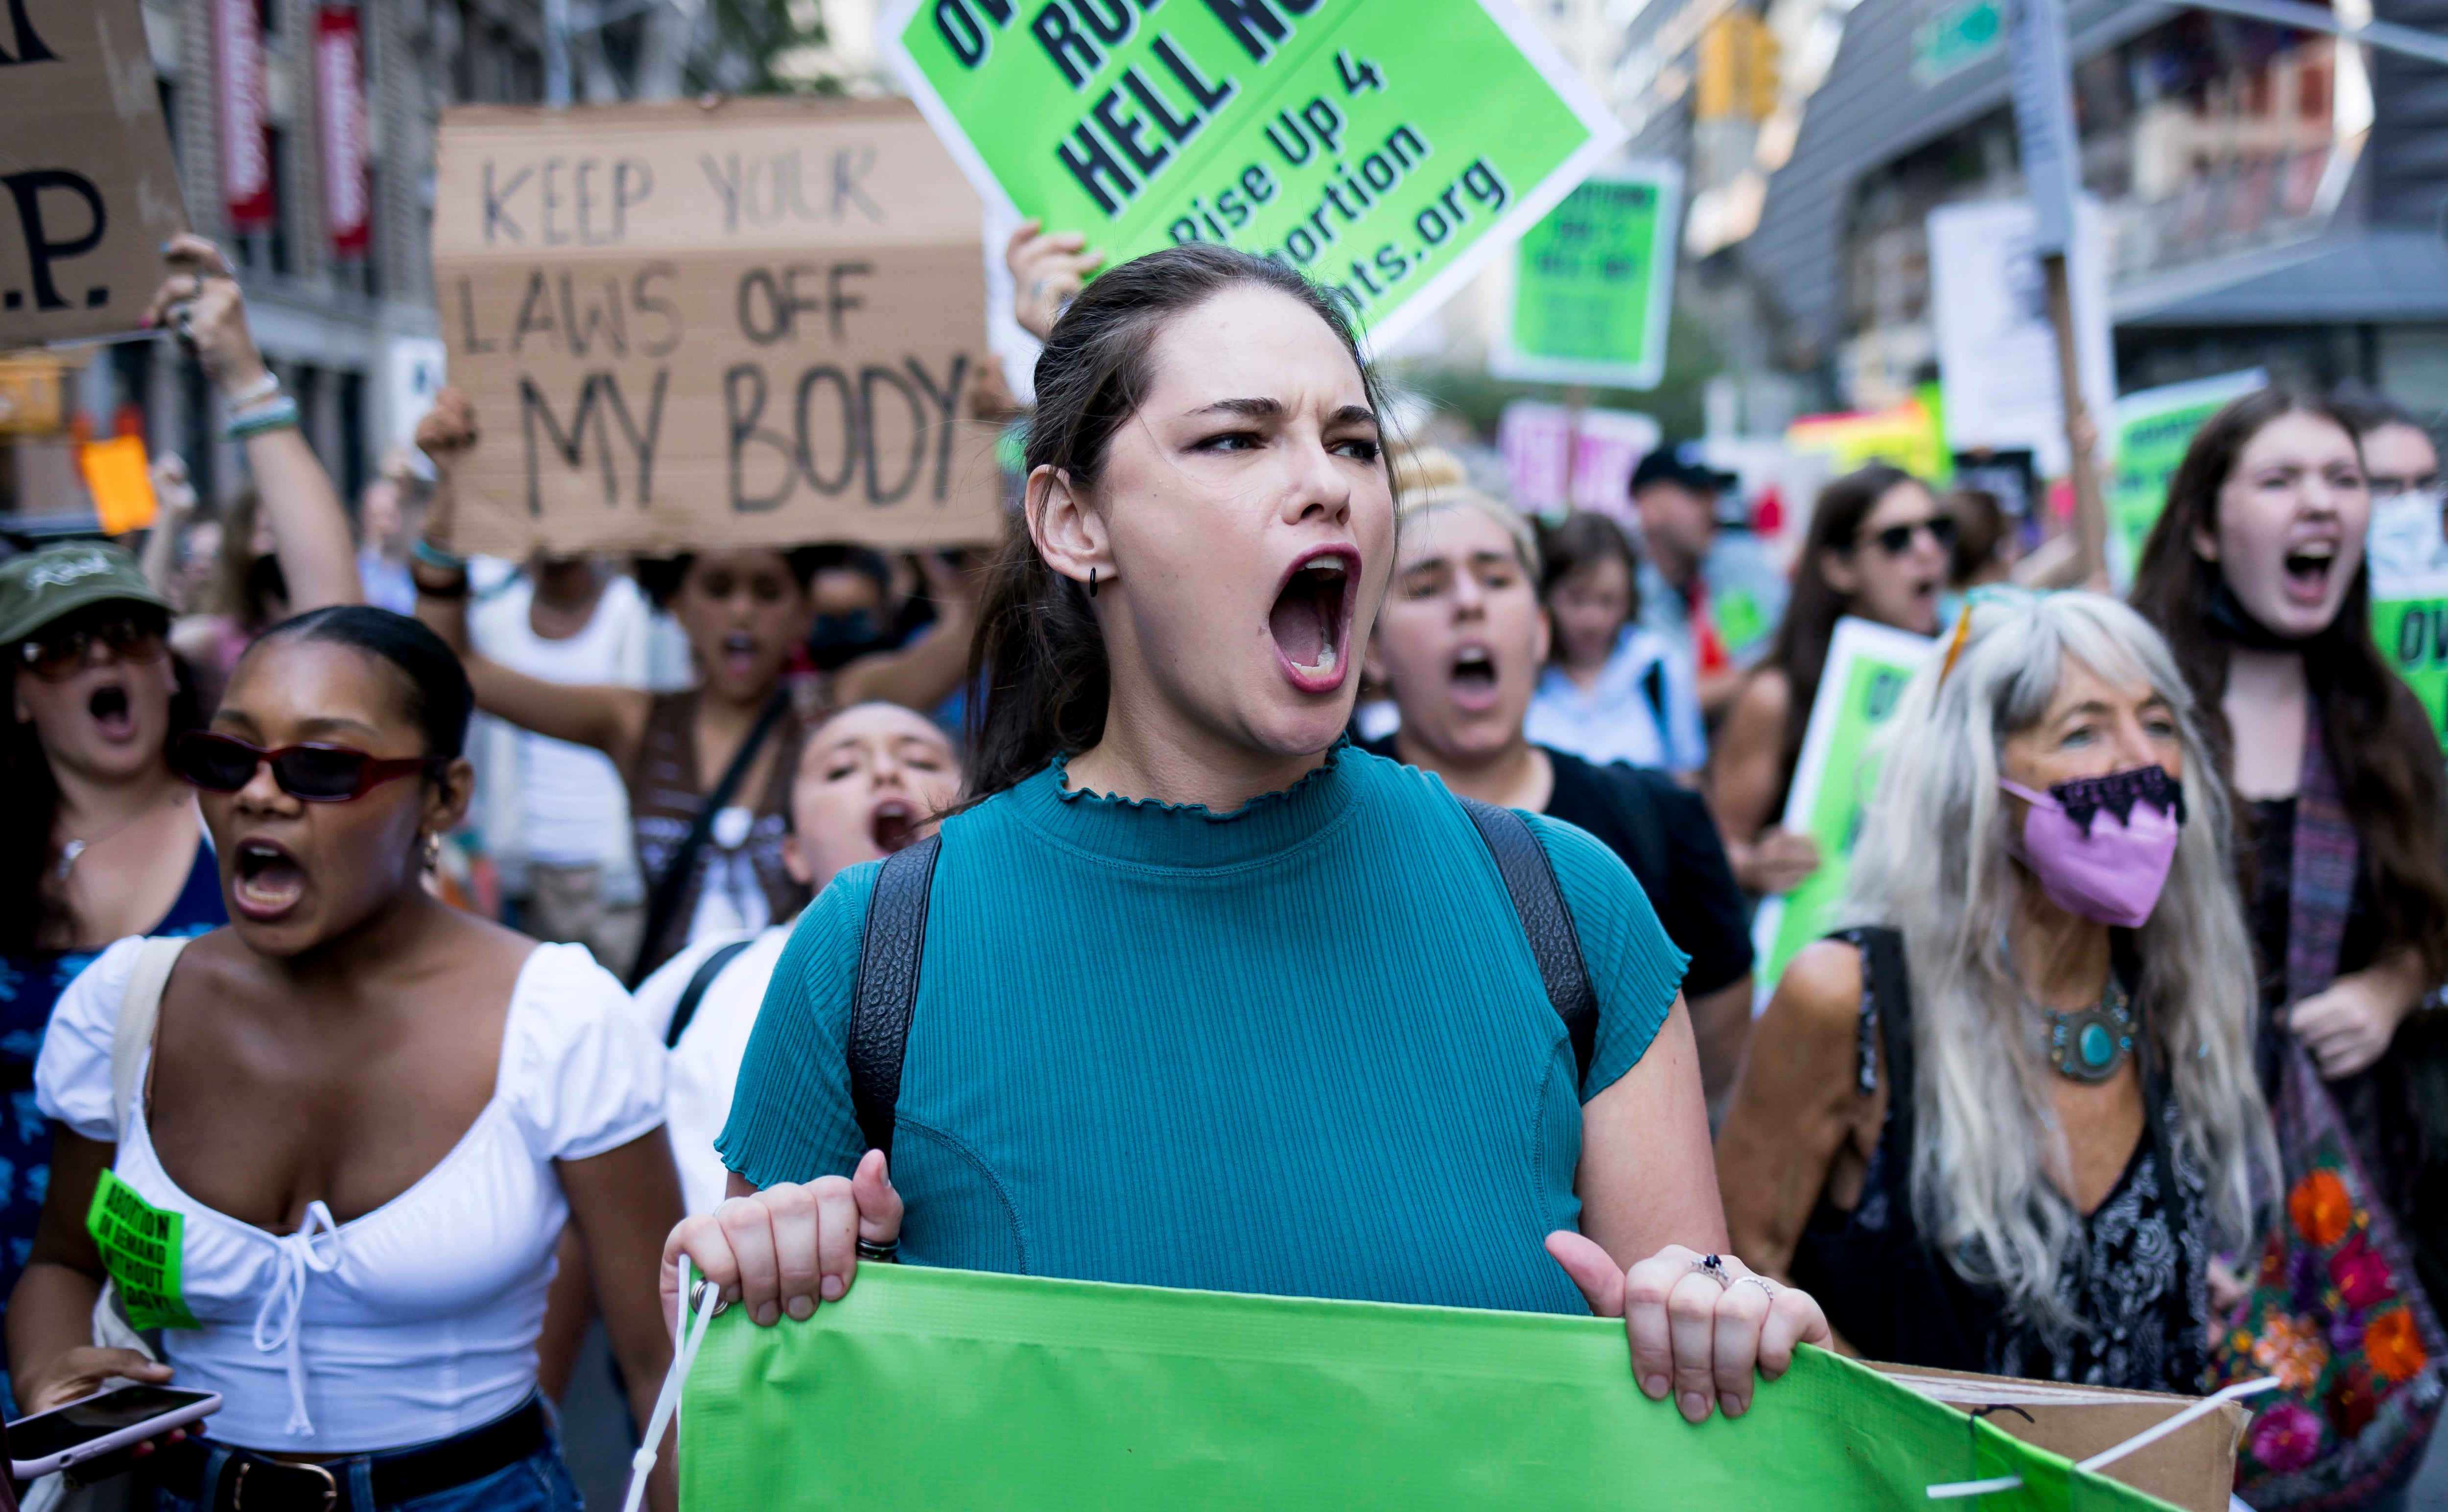 People march during an abortion rights protest in reaction to today's US Supreme Court decision in Dobbs v Jackson Women's Health Organization in New York, New York, USA.